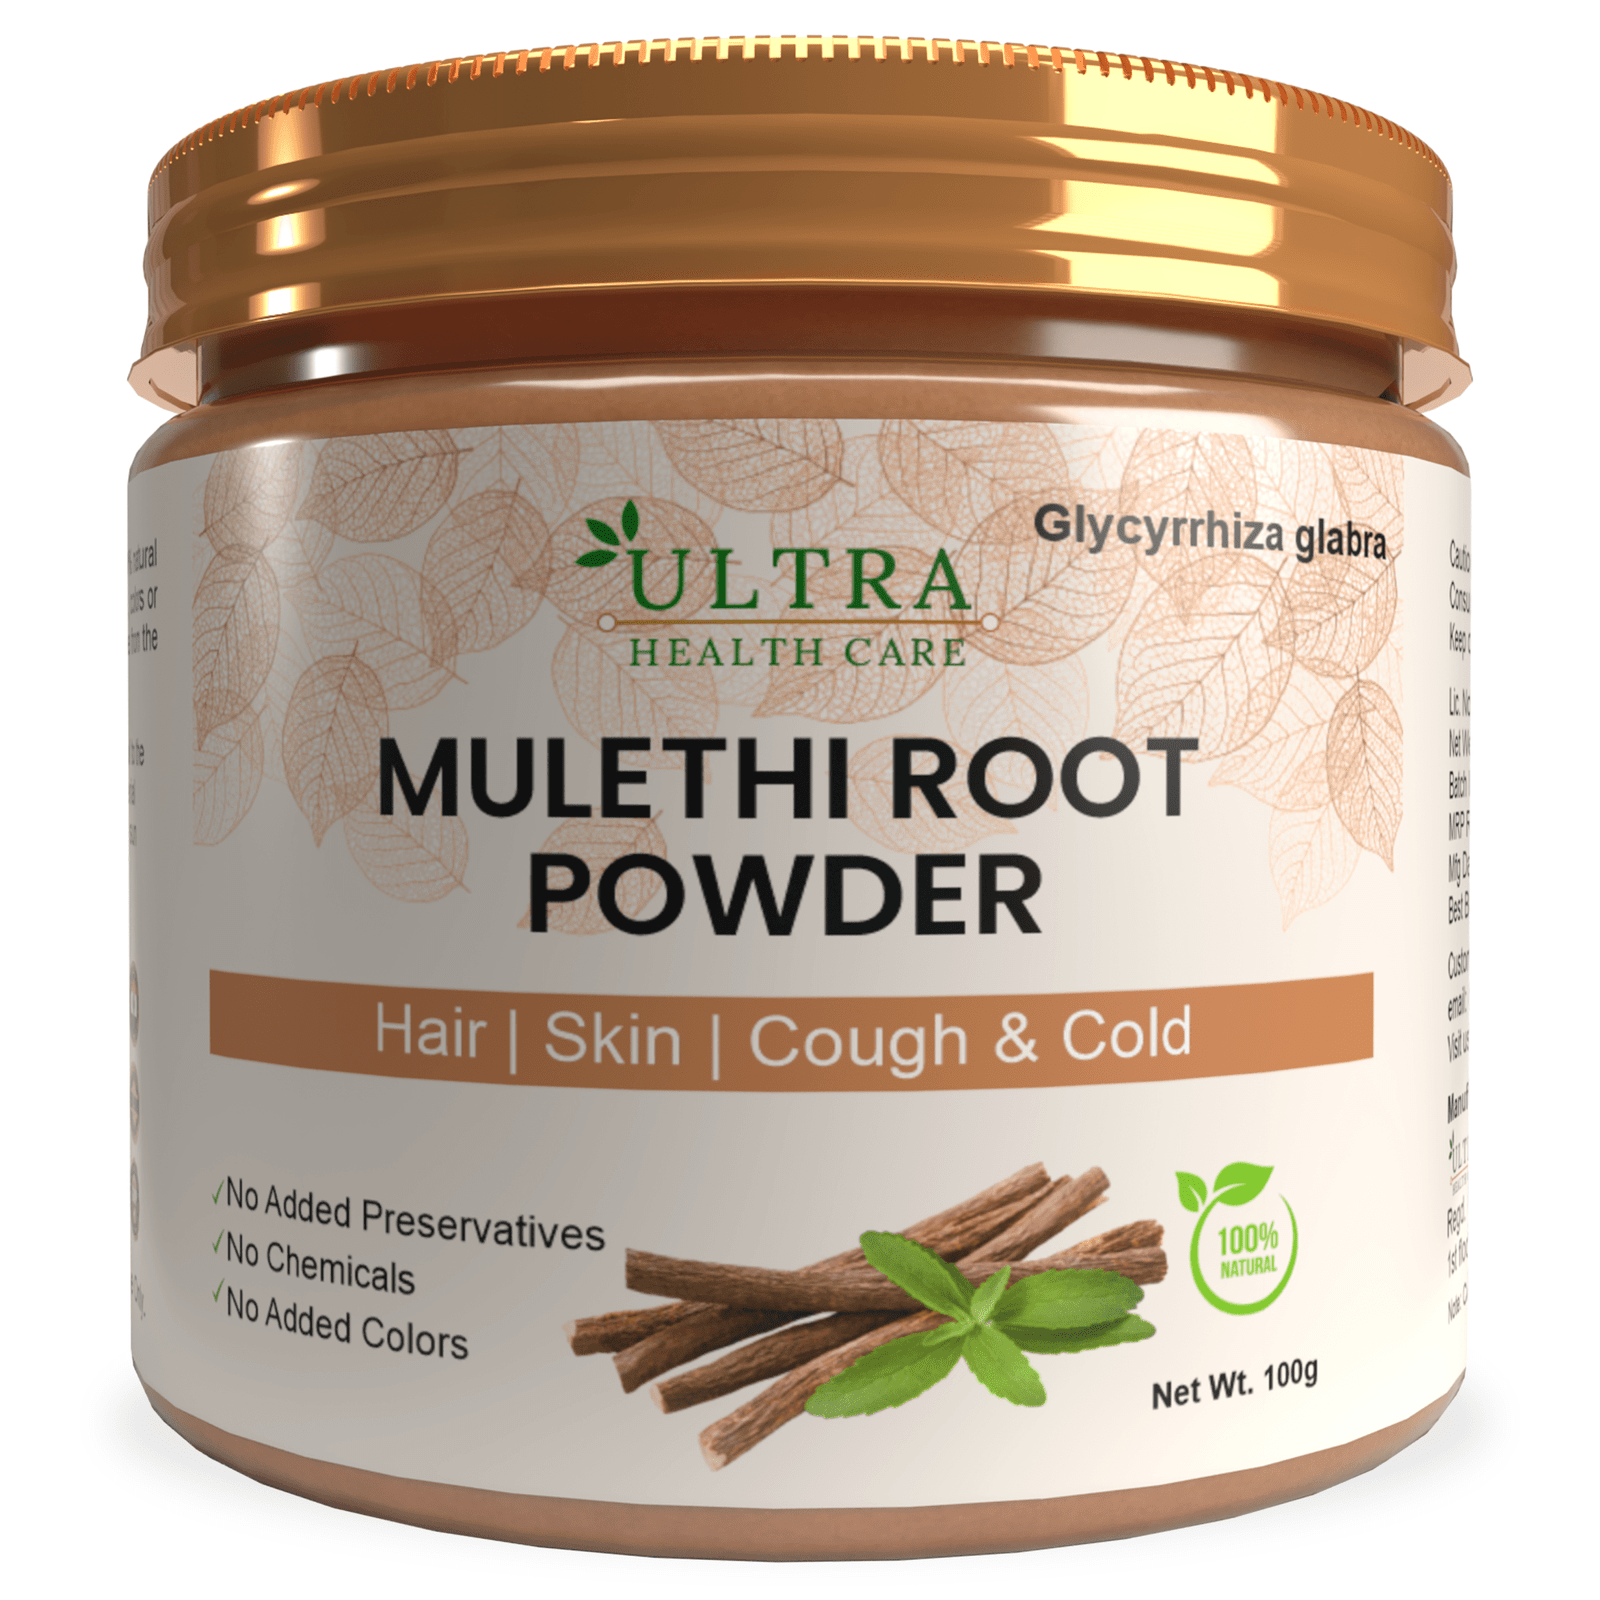 Promote Hair Growth With Mulethi Powder Mulethi Hair Care झडत बल क  रमबण इलज ह मलठ पउडर गरम क मसम म ऐस लगए  mulethi is a  natural herb to promote hair